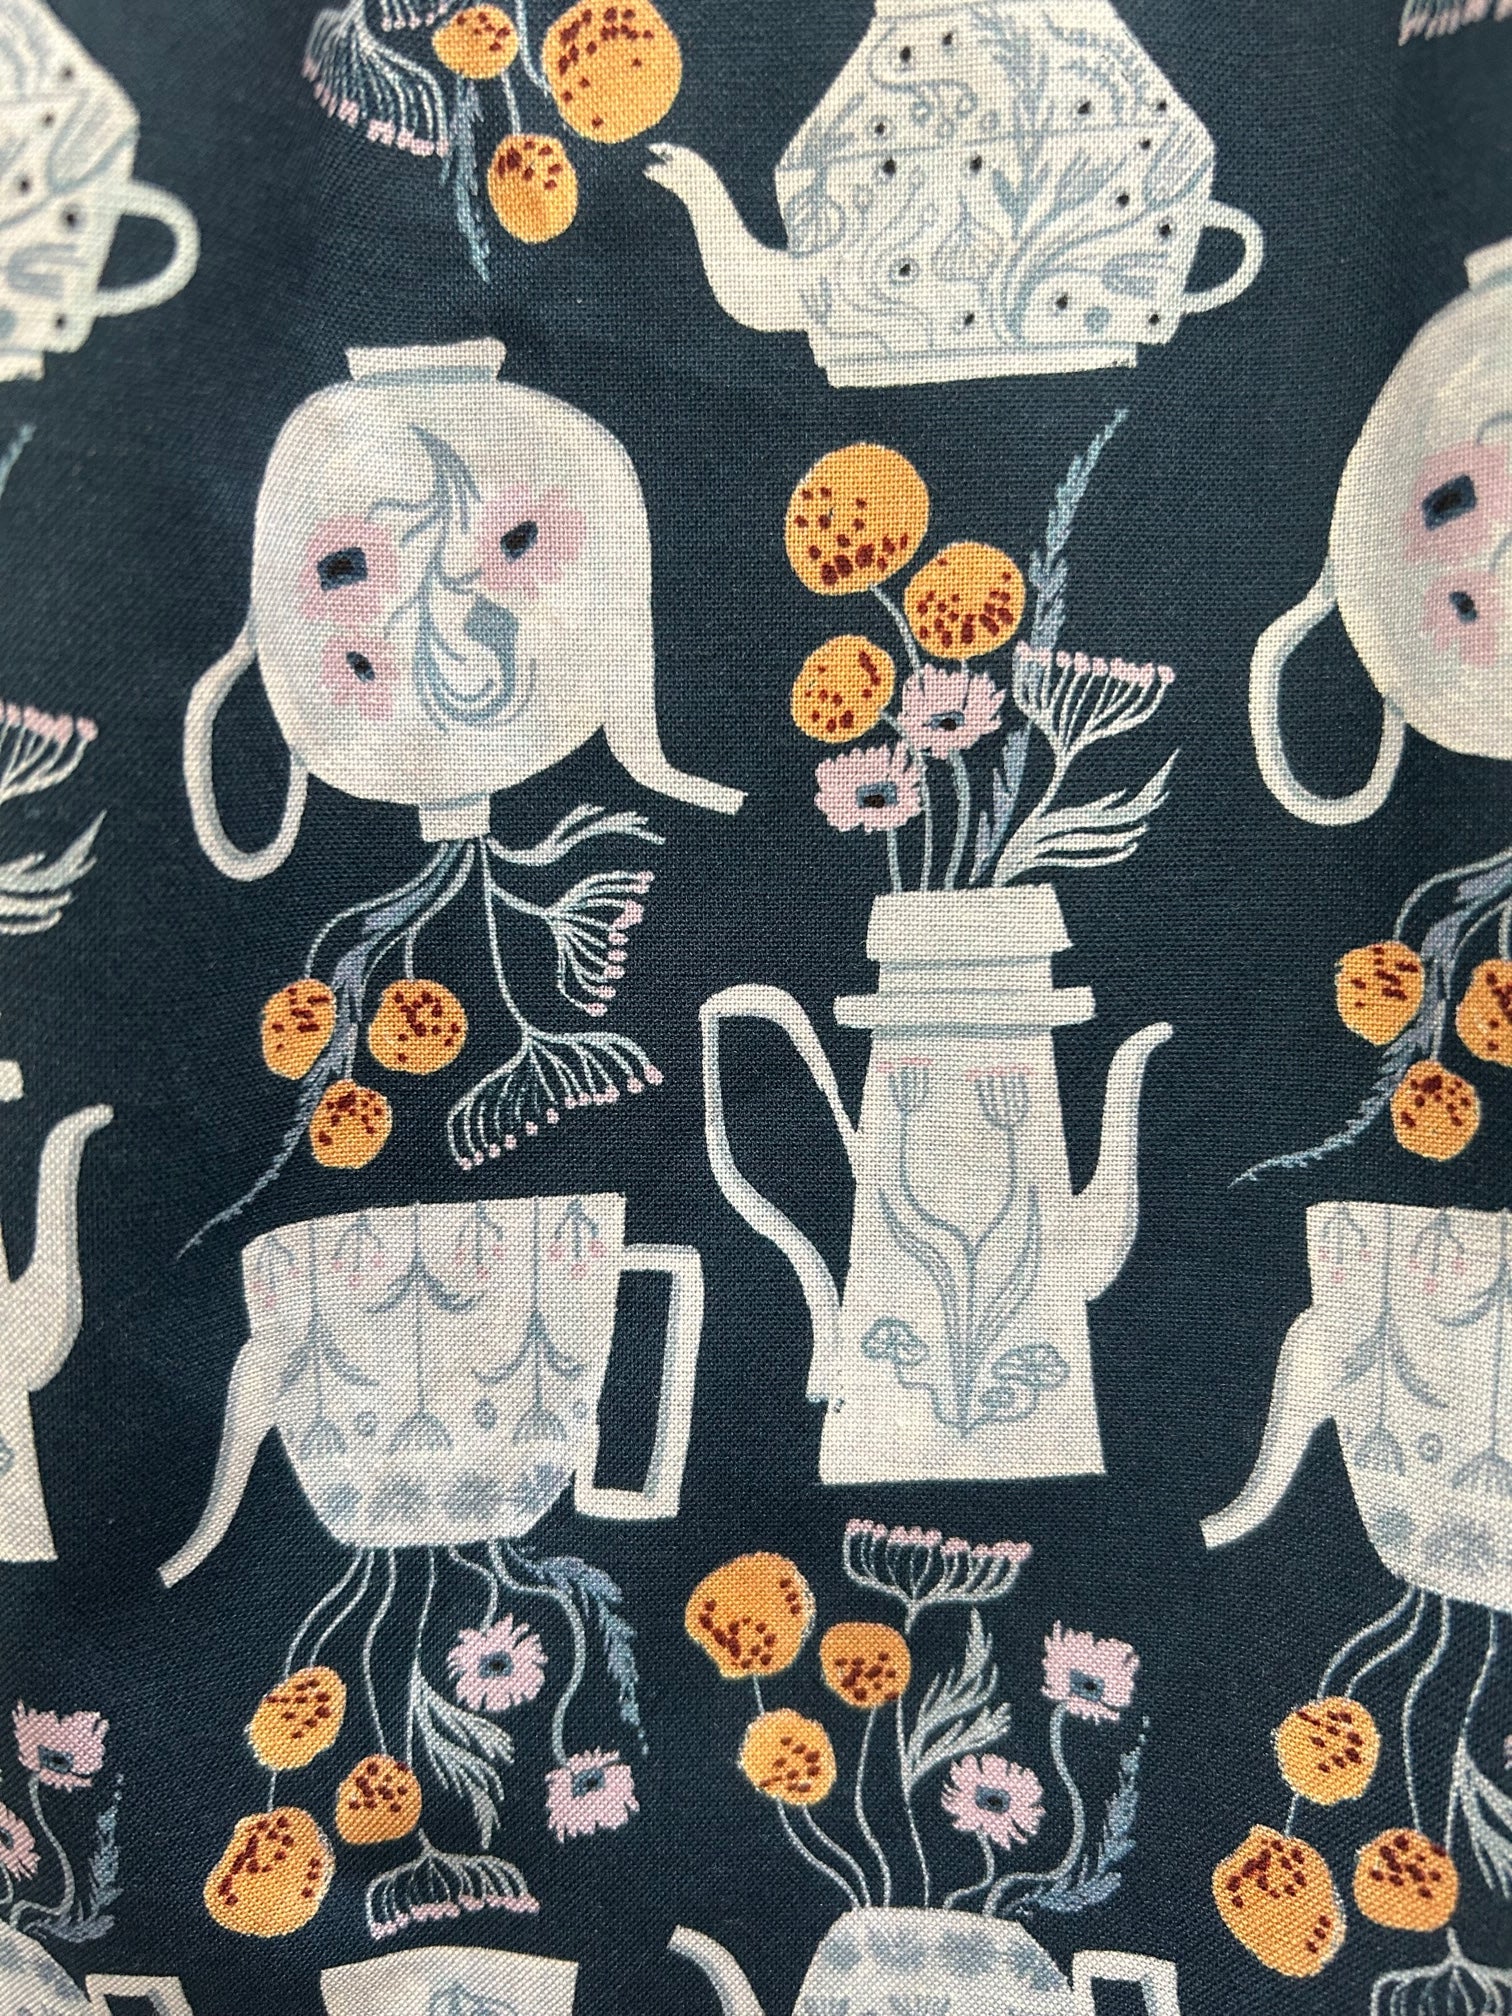 a close up of the fabric of teapots fit and flare dress showing teapots with flowers in them on navy blue background